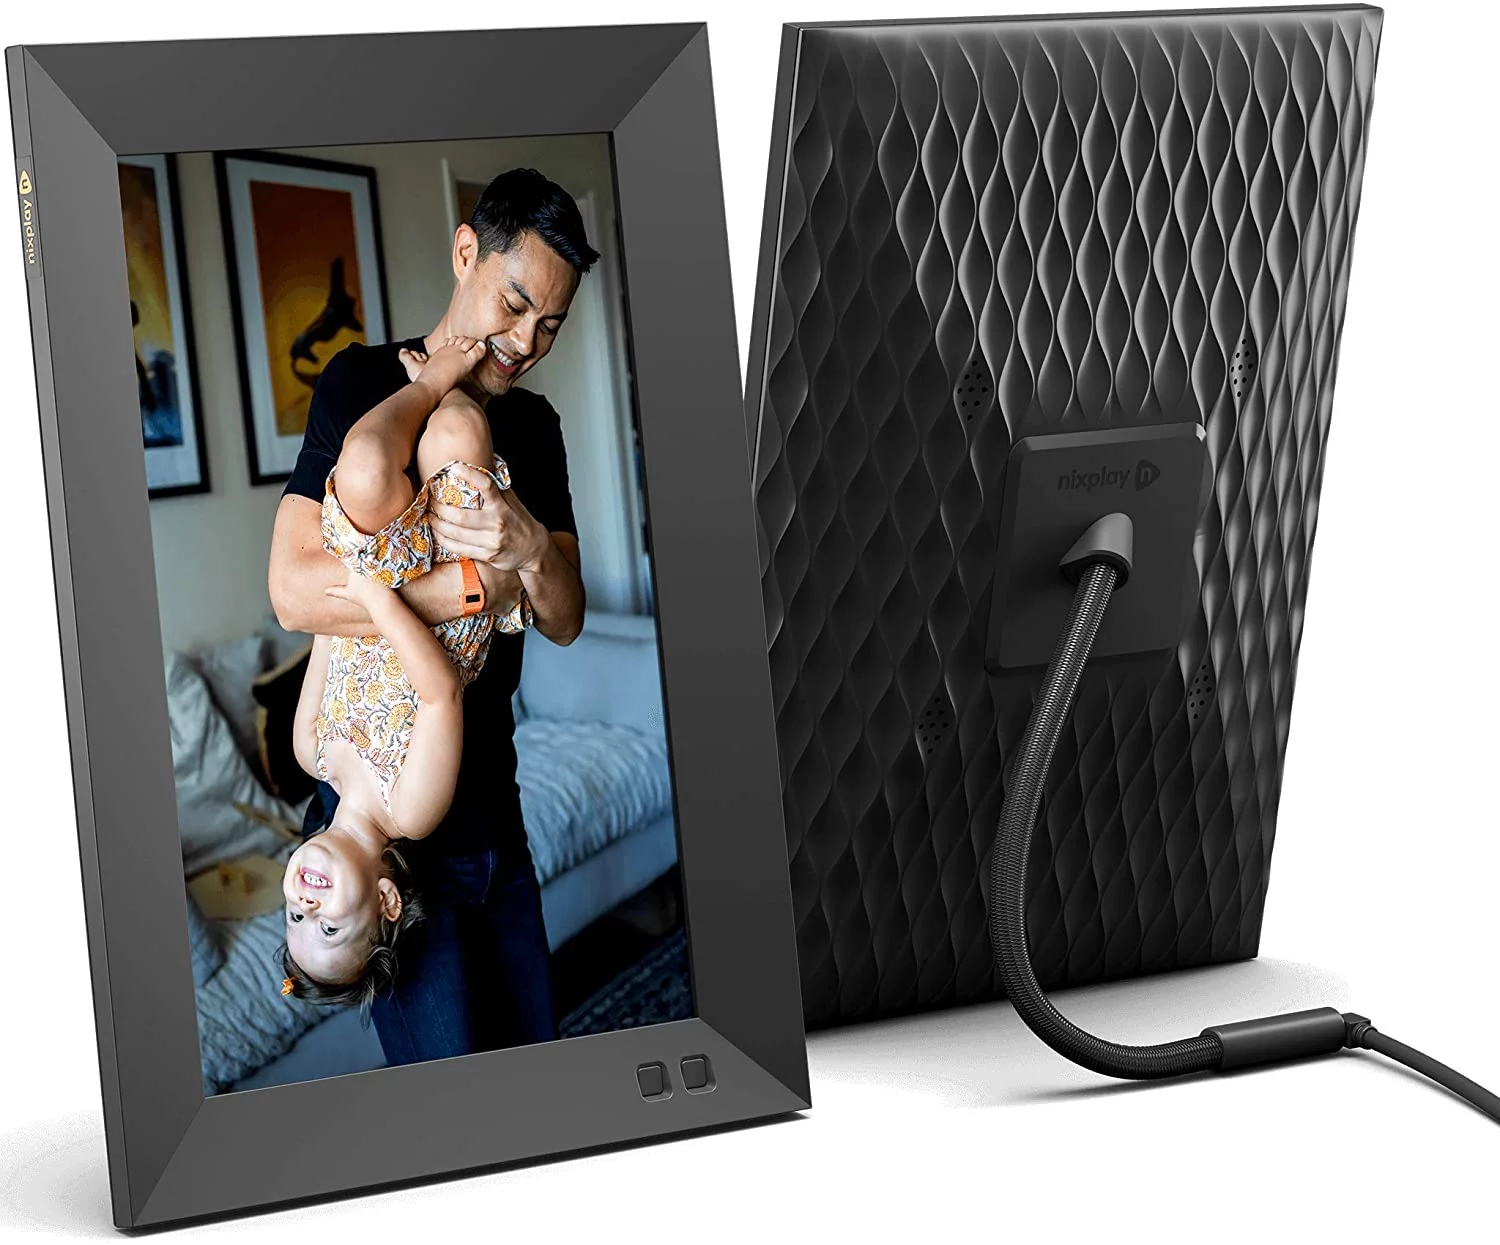 Nixplay Smart Wi-Fi Digital Photo Frame W10J - Share Photos and Videos Instantly